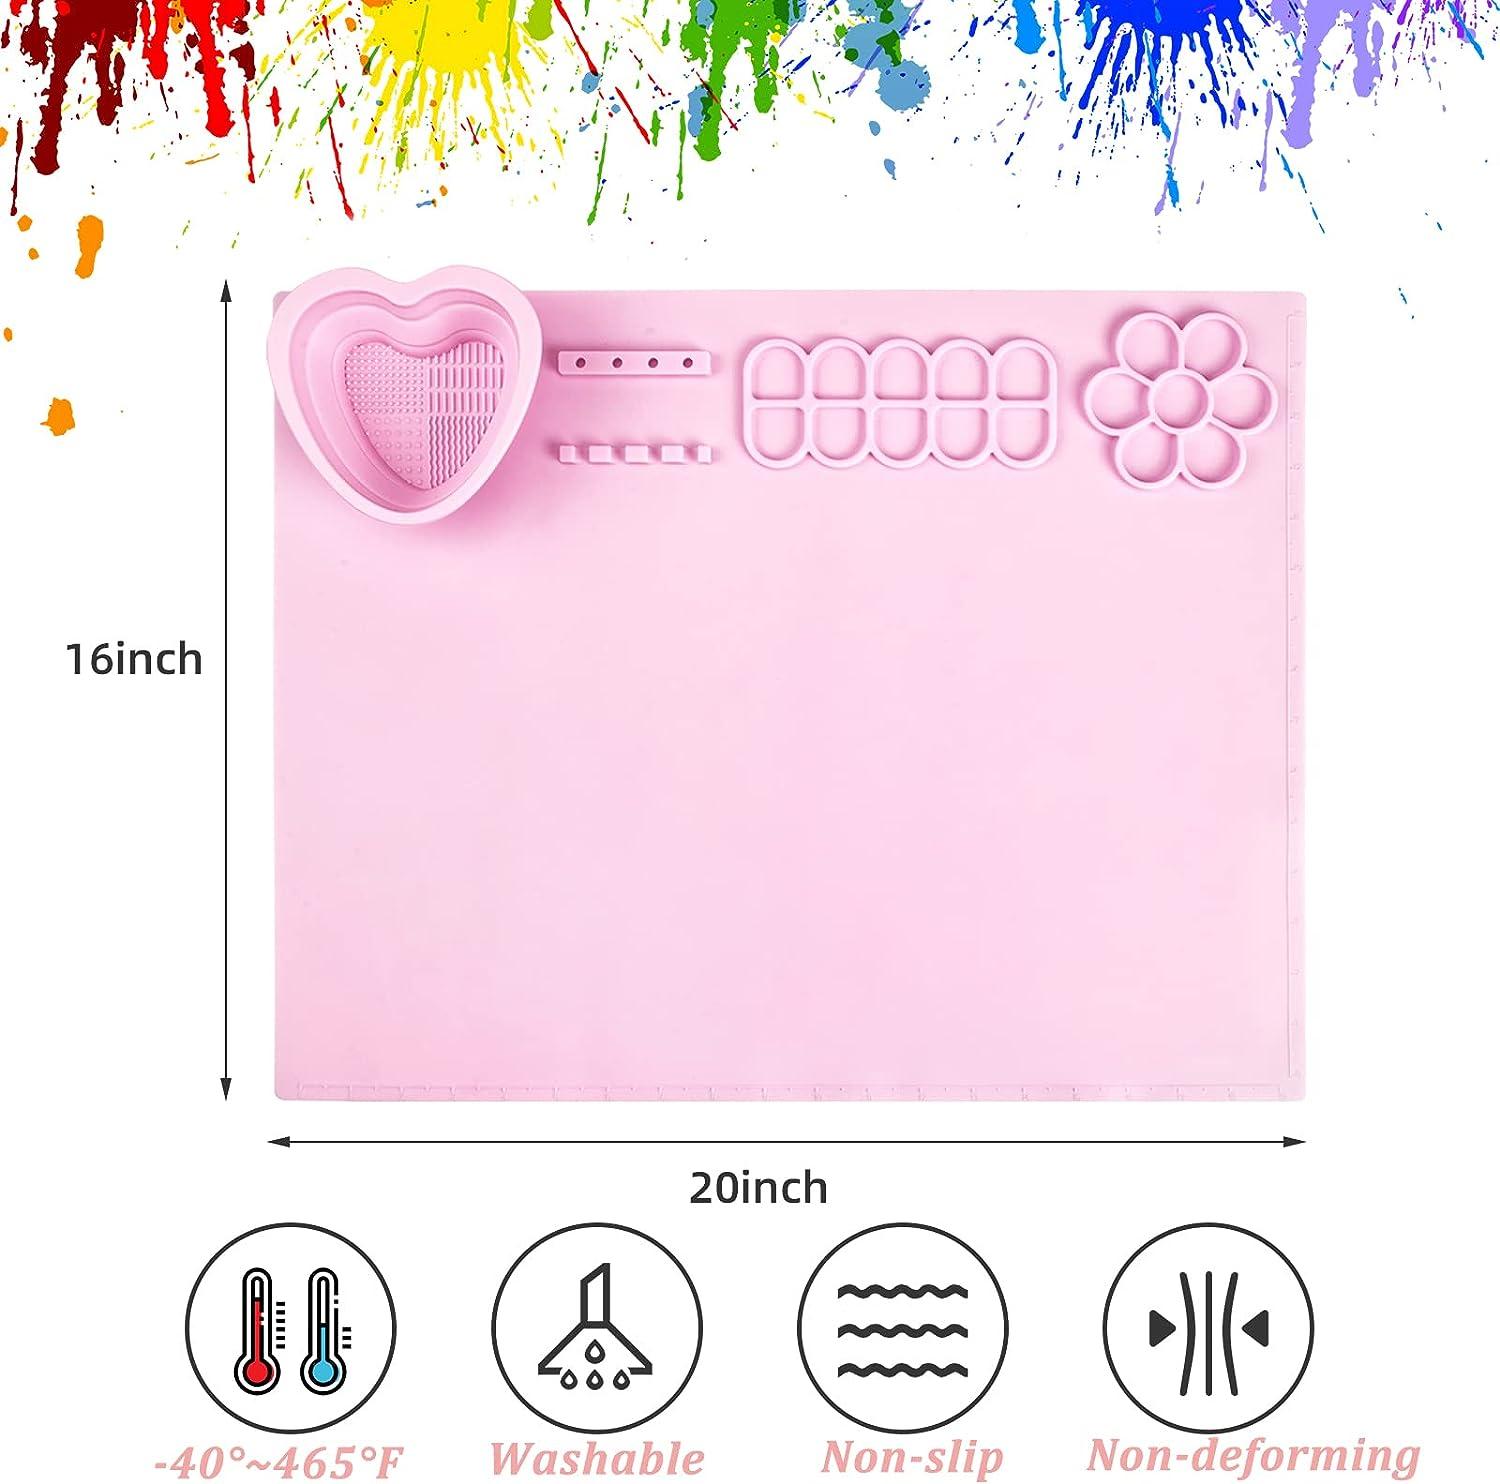 Paint Palette,Thick Silicone Craft Mat with Magnetic Pop-Up Water Cup,2016  inches Large Silicone Mat for Painting,Sculpting,Resin Crafting,Clay and  Play-Doh,Hot Glue Projects,for Adults and Kids Pink